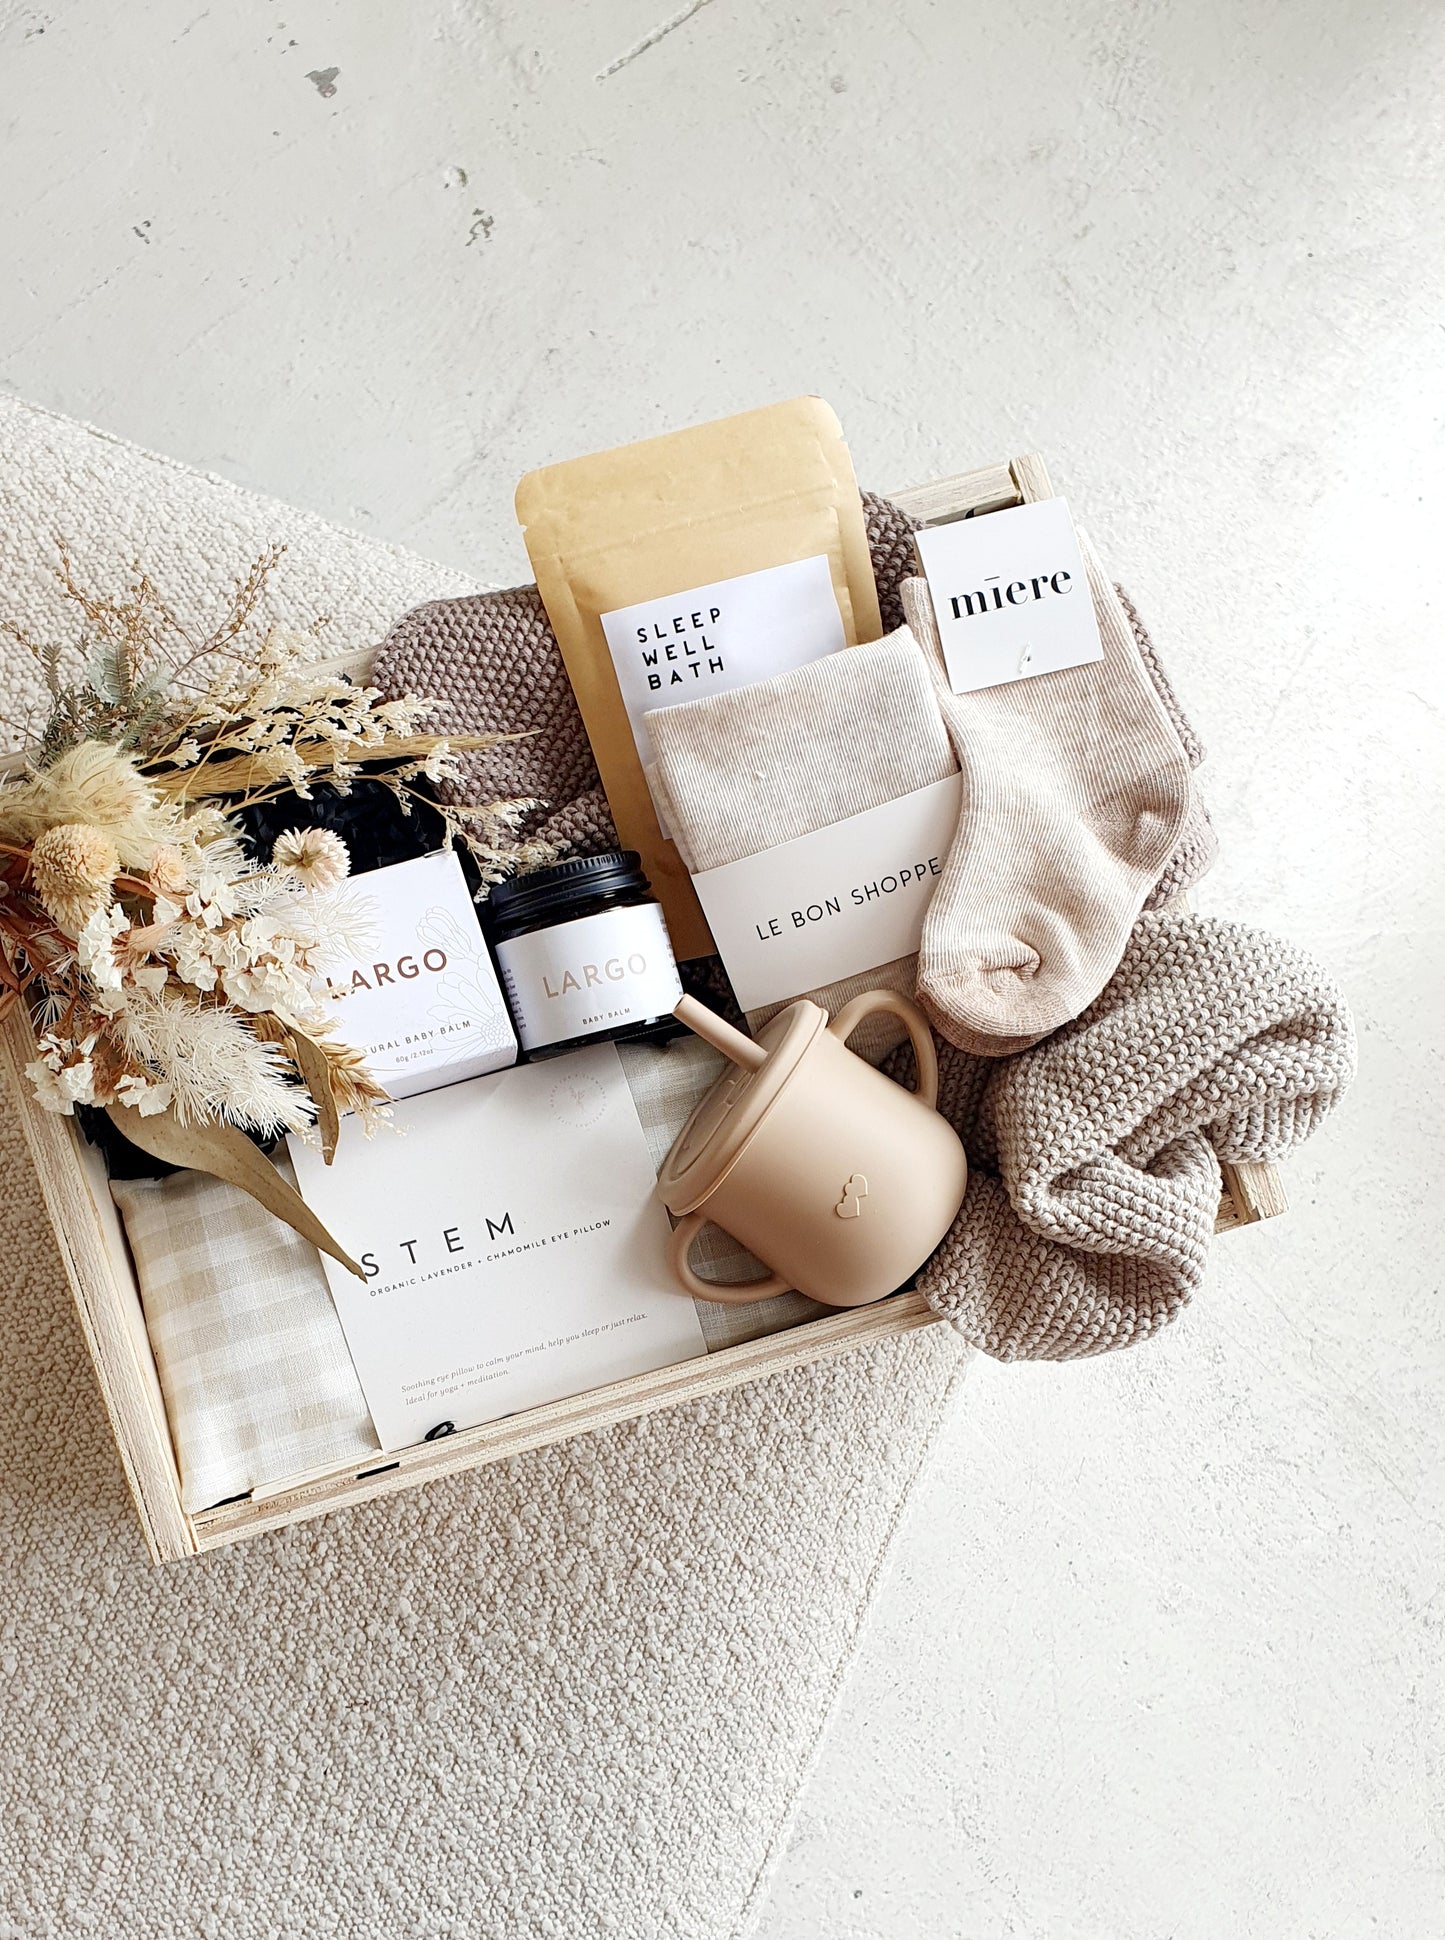 baby shower gifts delivered throughout nz by bundle and blooms